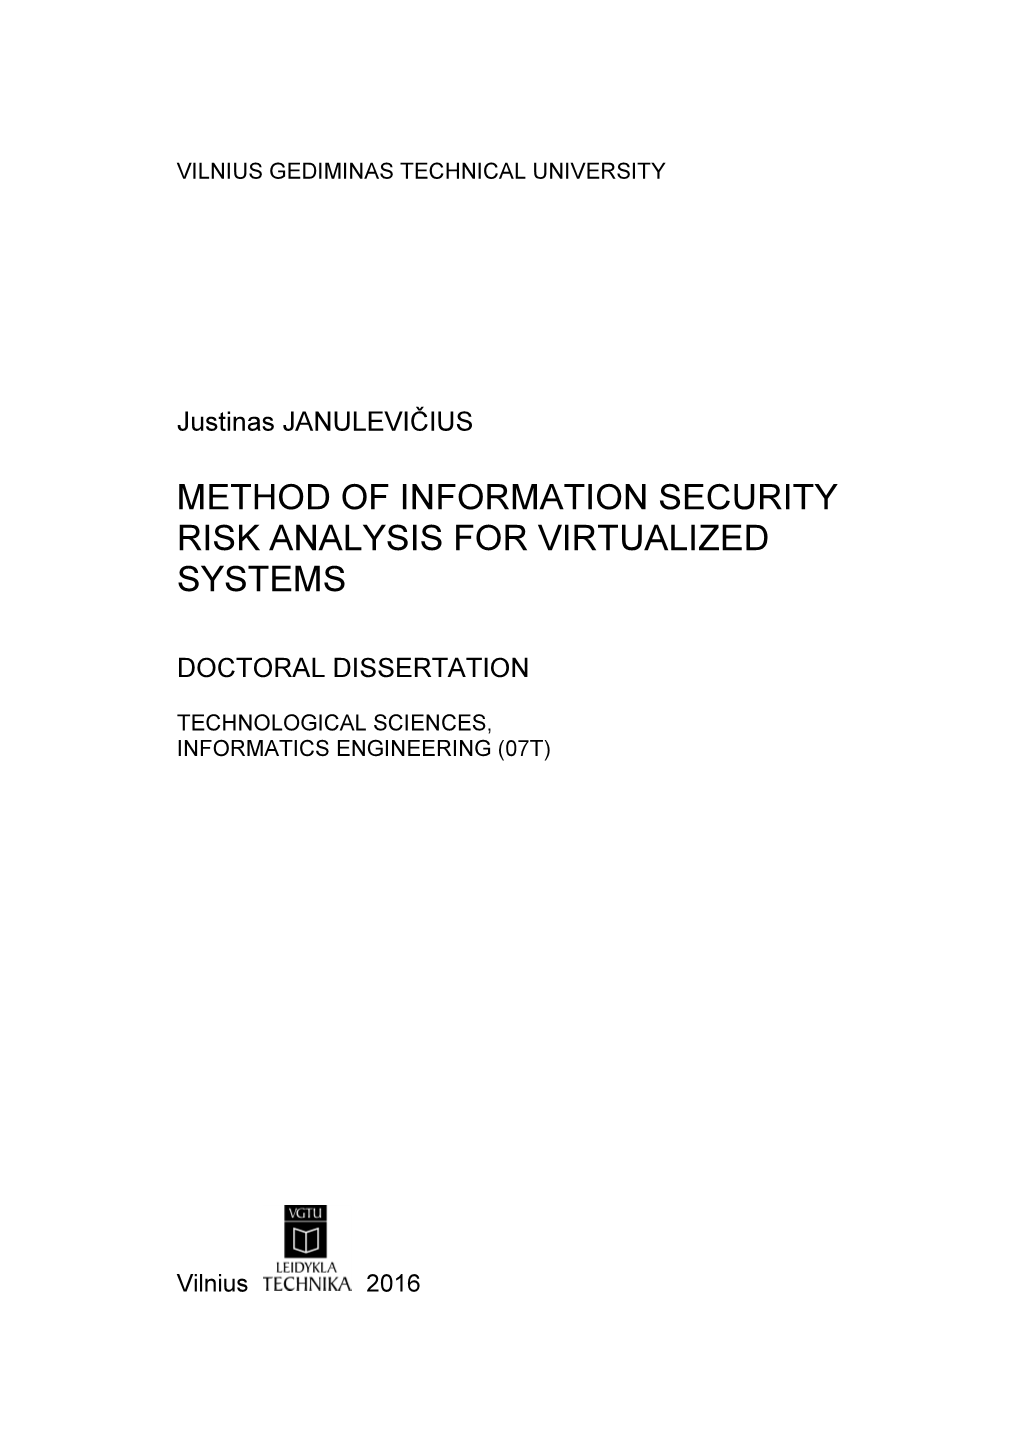 Method of Information Security Risk Analysis for Virtualized Systems